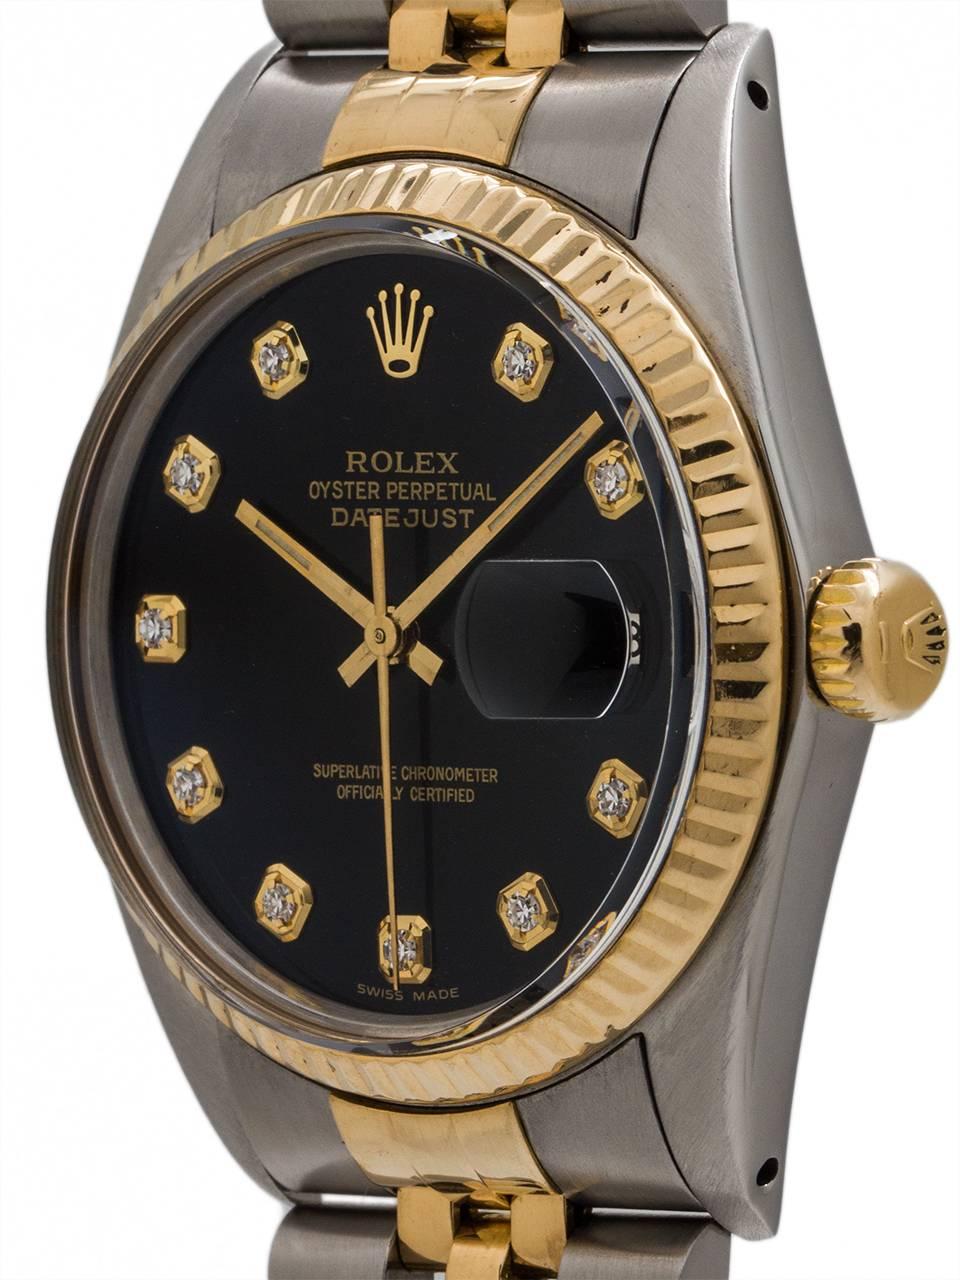 Rolex Datejust ref 16013 SS/18K YG circa 1980 with glossy black diamond set dial. Featuring full size man’s 36mm diameter case with 18K YG fluted bezel, acrylic crystal, and customized glossy black diamond set dial. Powered by calibre 3035 self